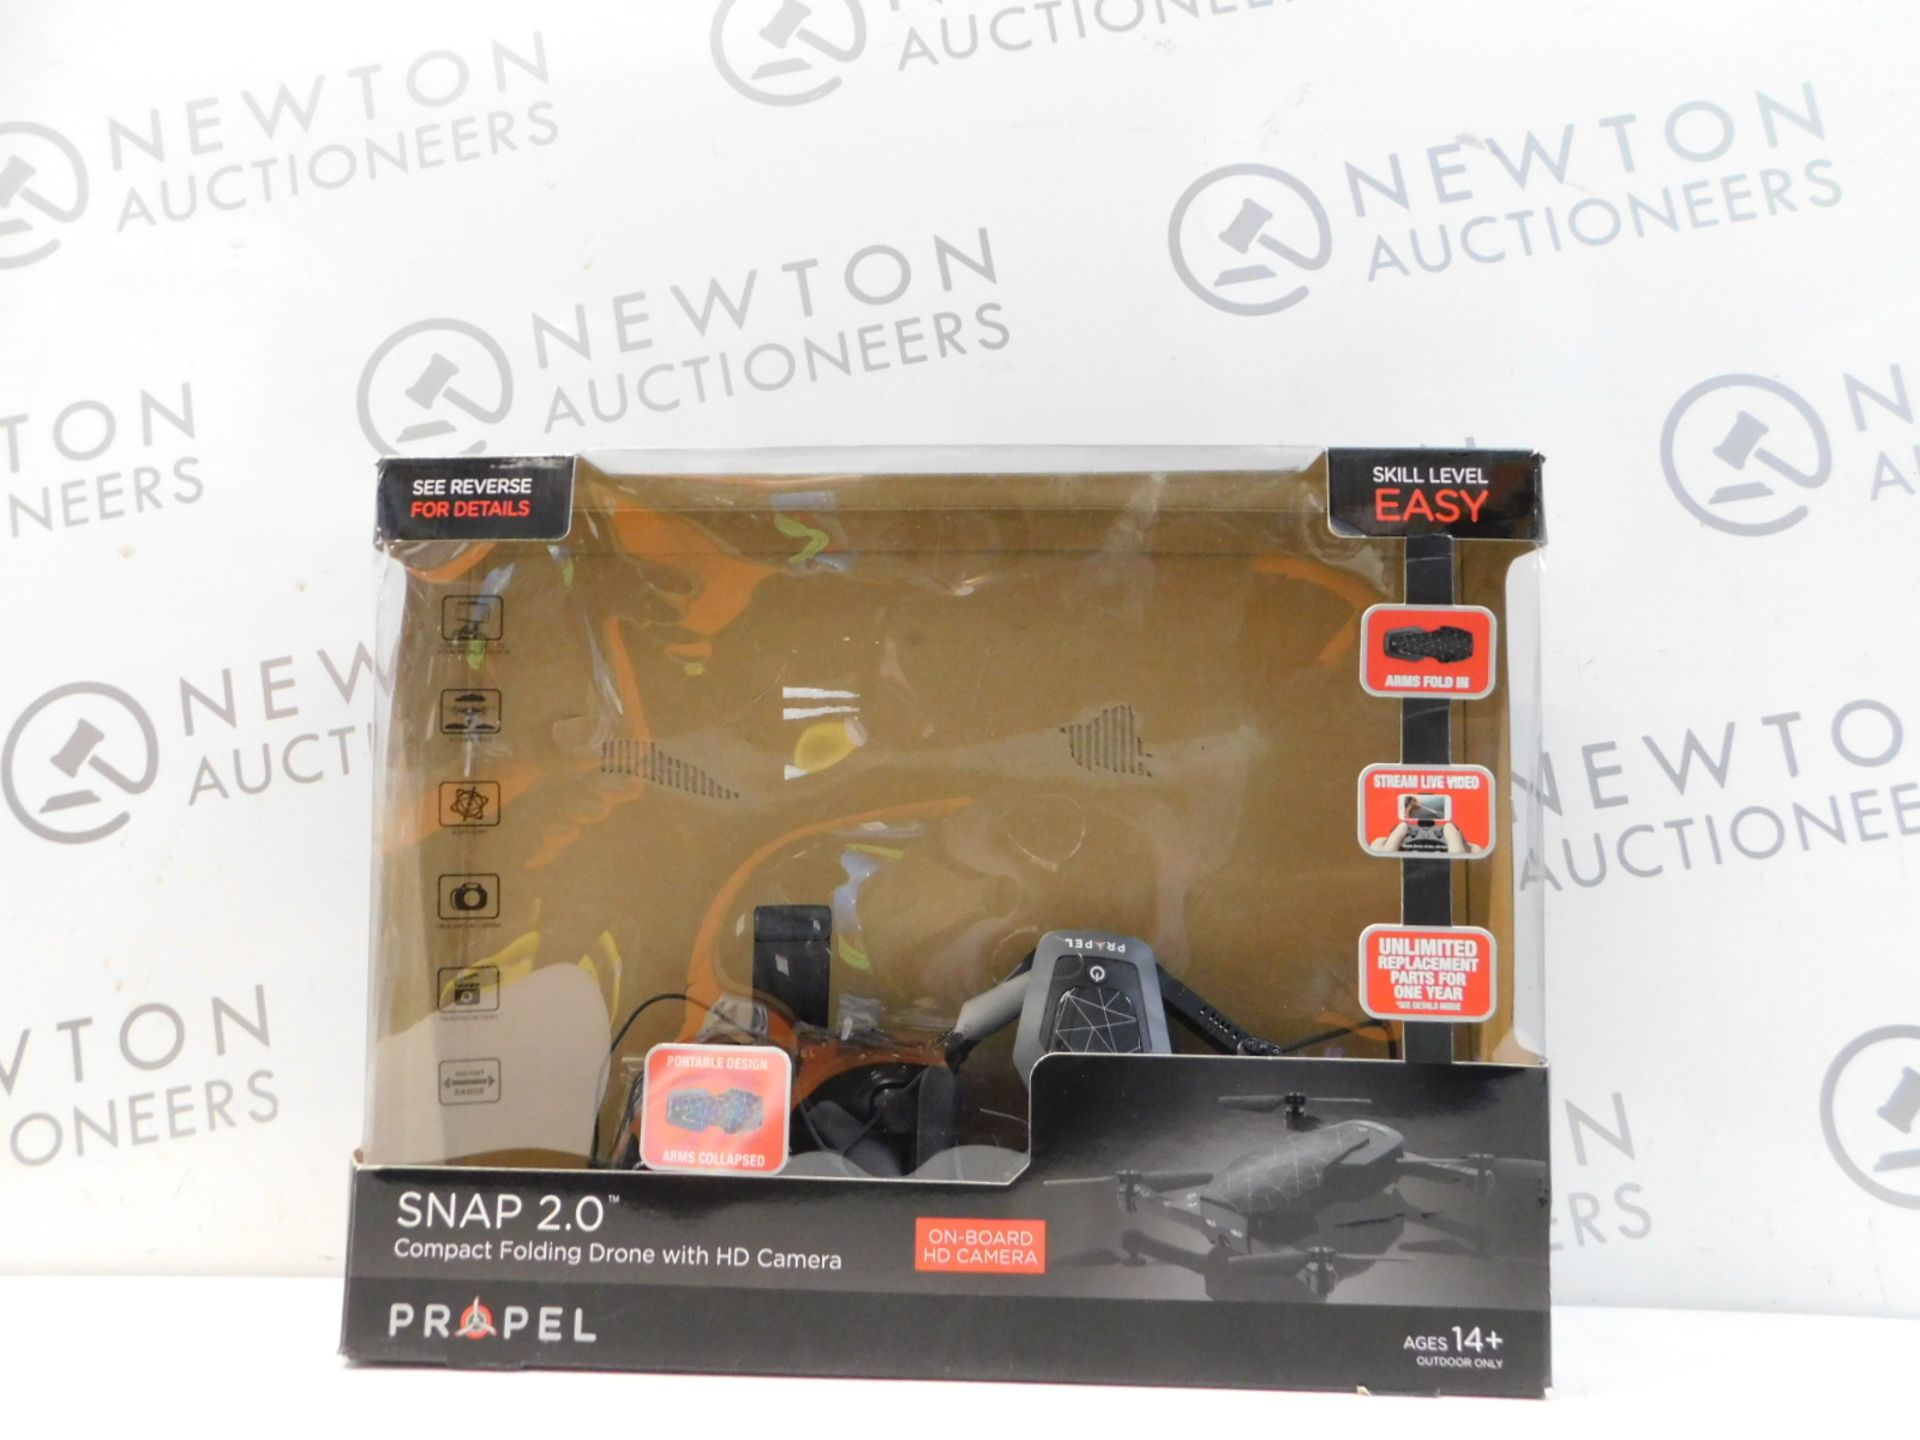 1 BOXED PROPEL SNAP 2.0 COMPACT FOLDING DRONE WITH HD CAMERA RRP Â£89.99